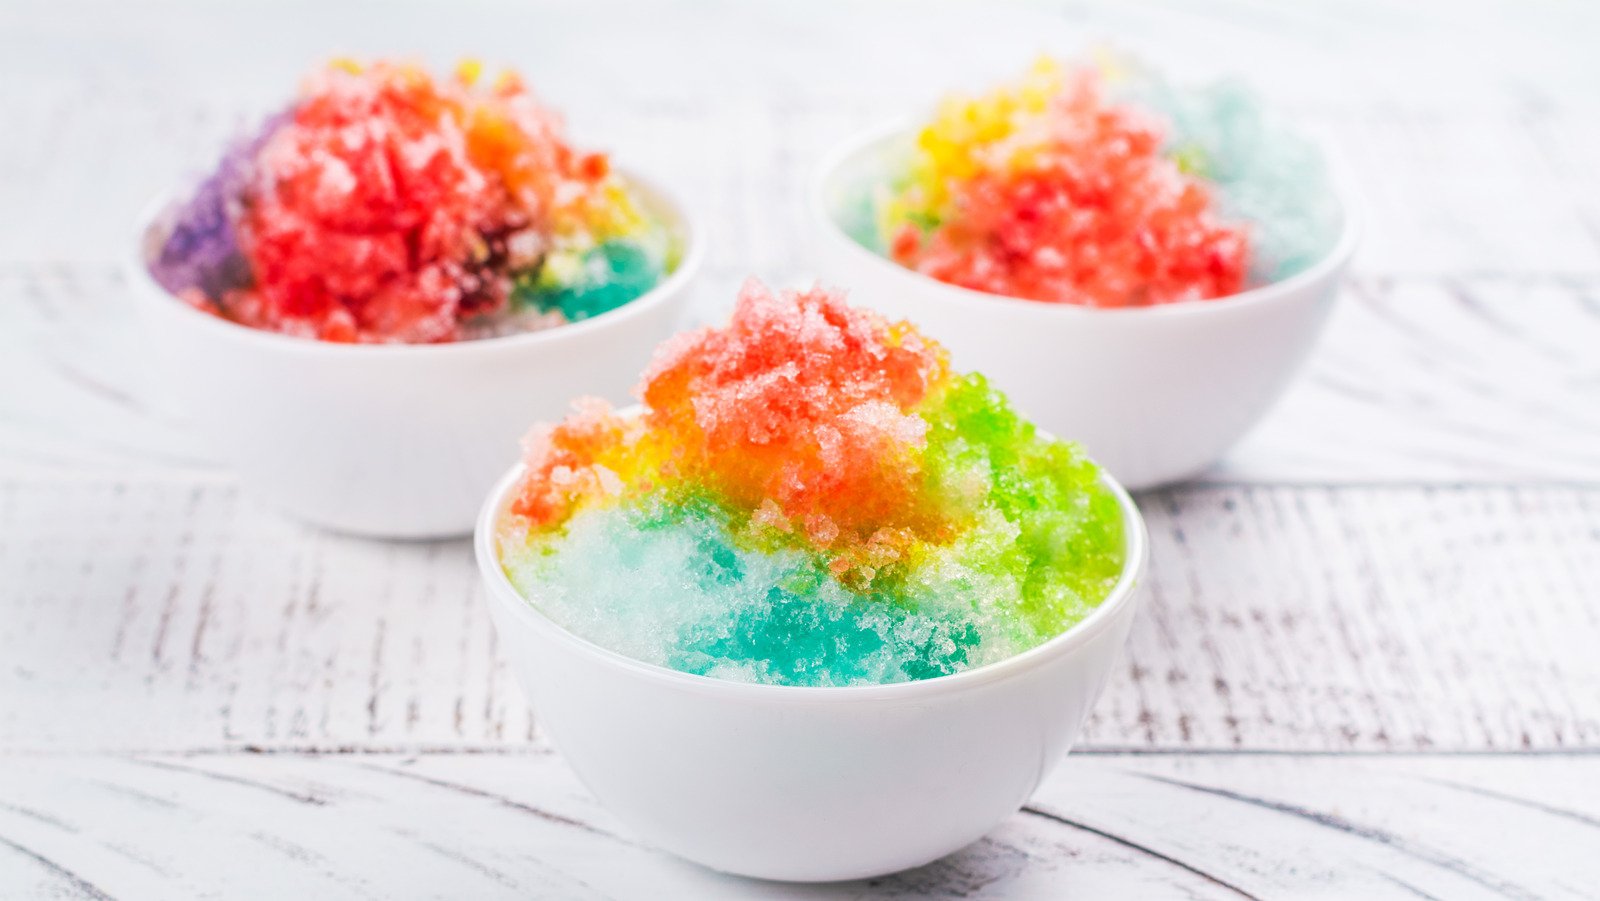 25 Best Snow Cone Flavors Ranked